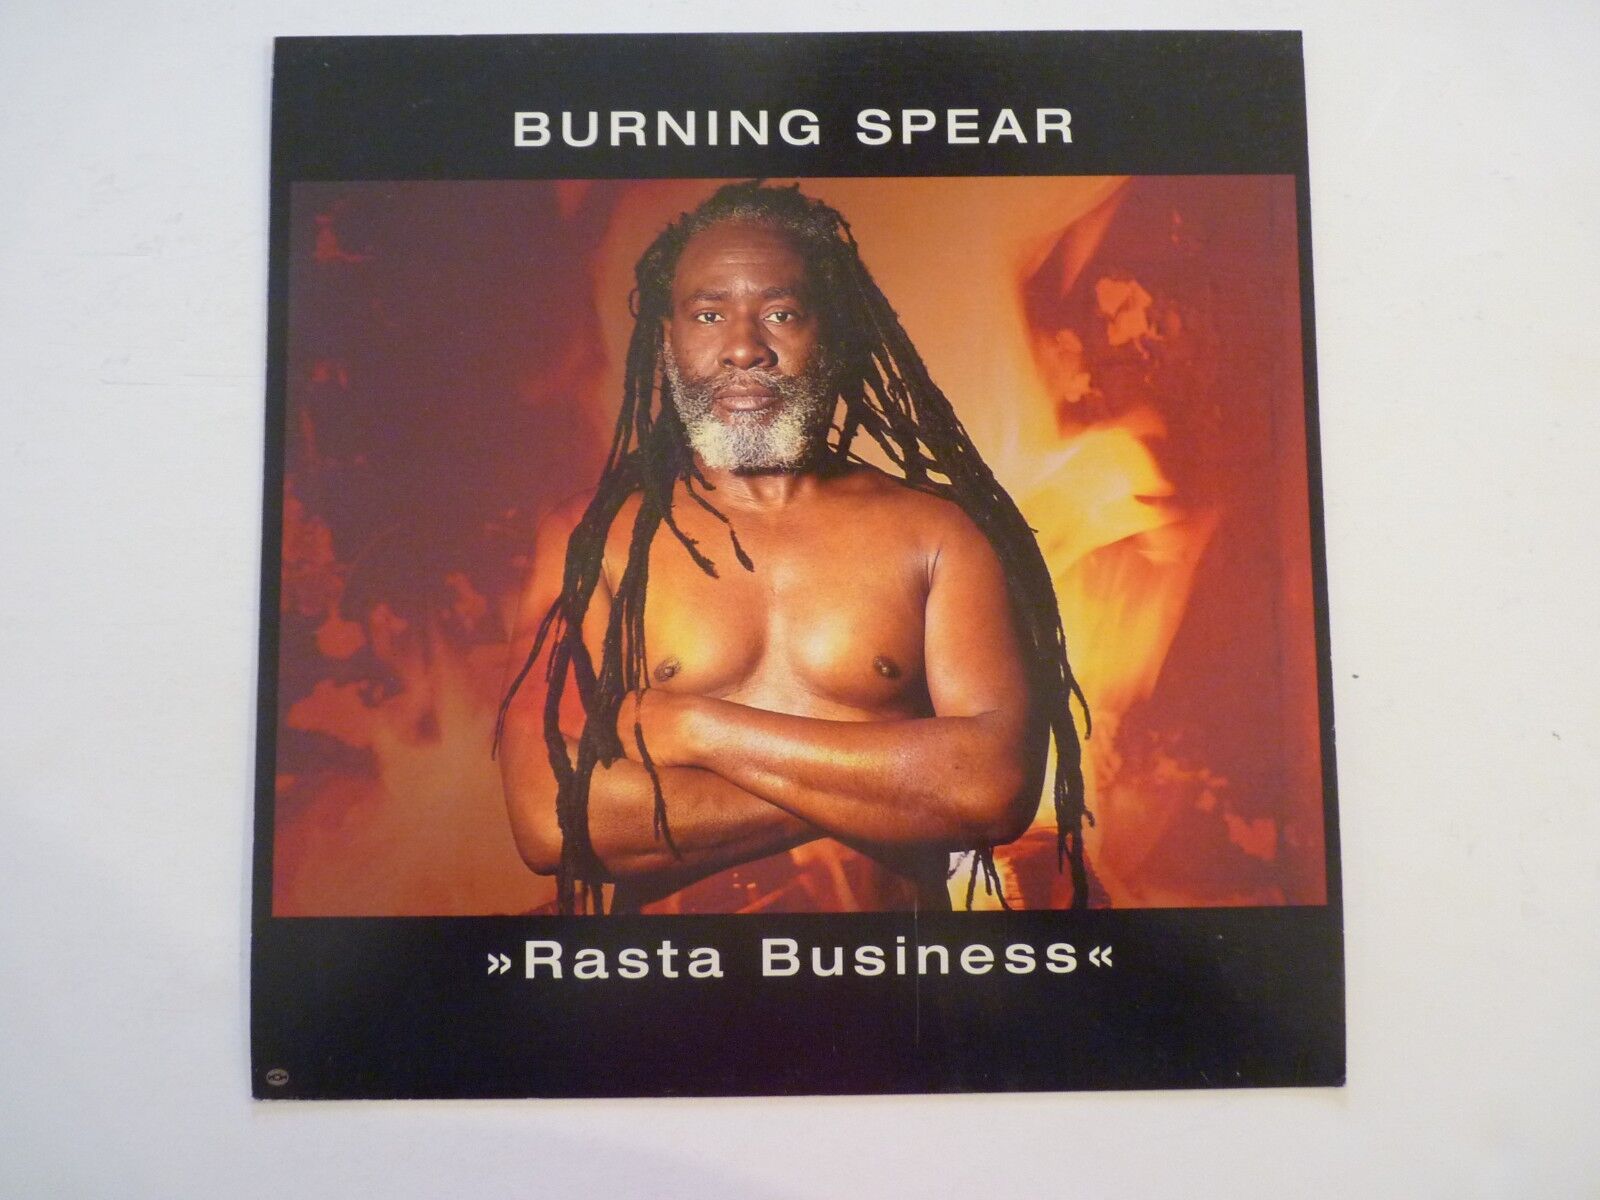 Burning Spear Rasta Business Cardboard LP Record Photo Poster painting Flat 12X12 Poster